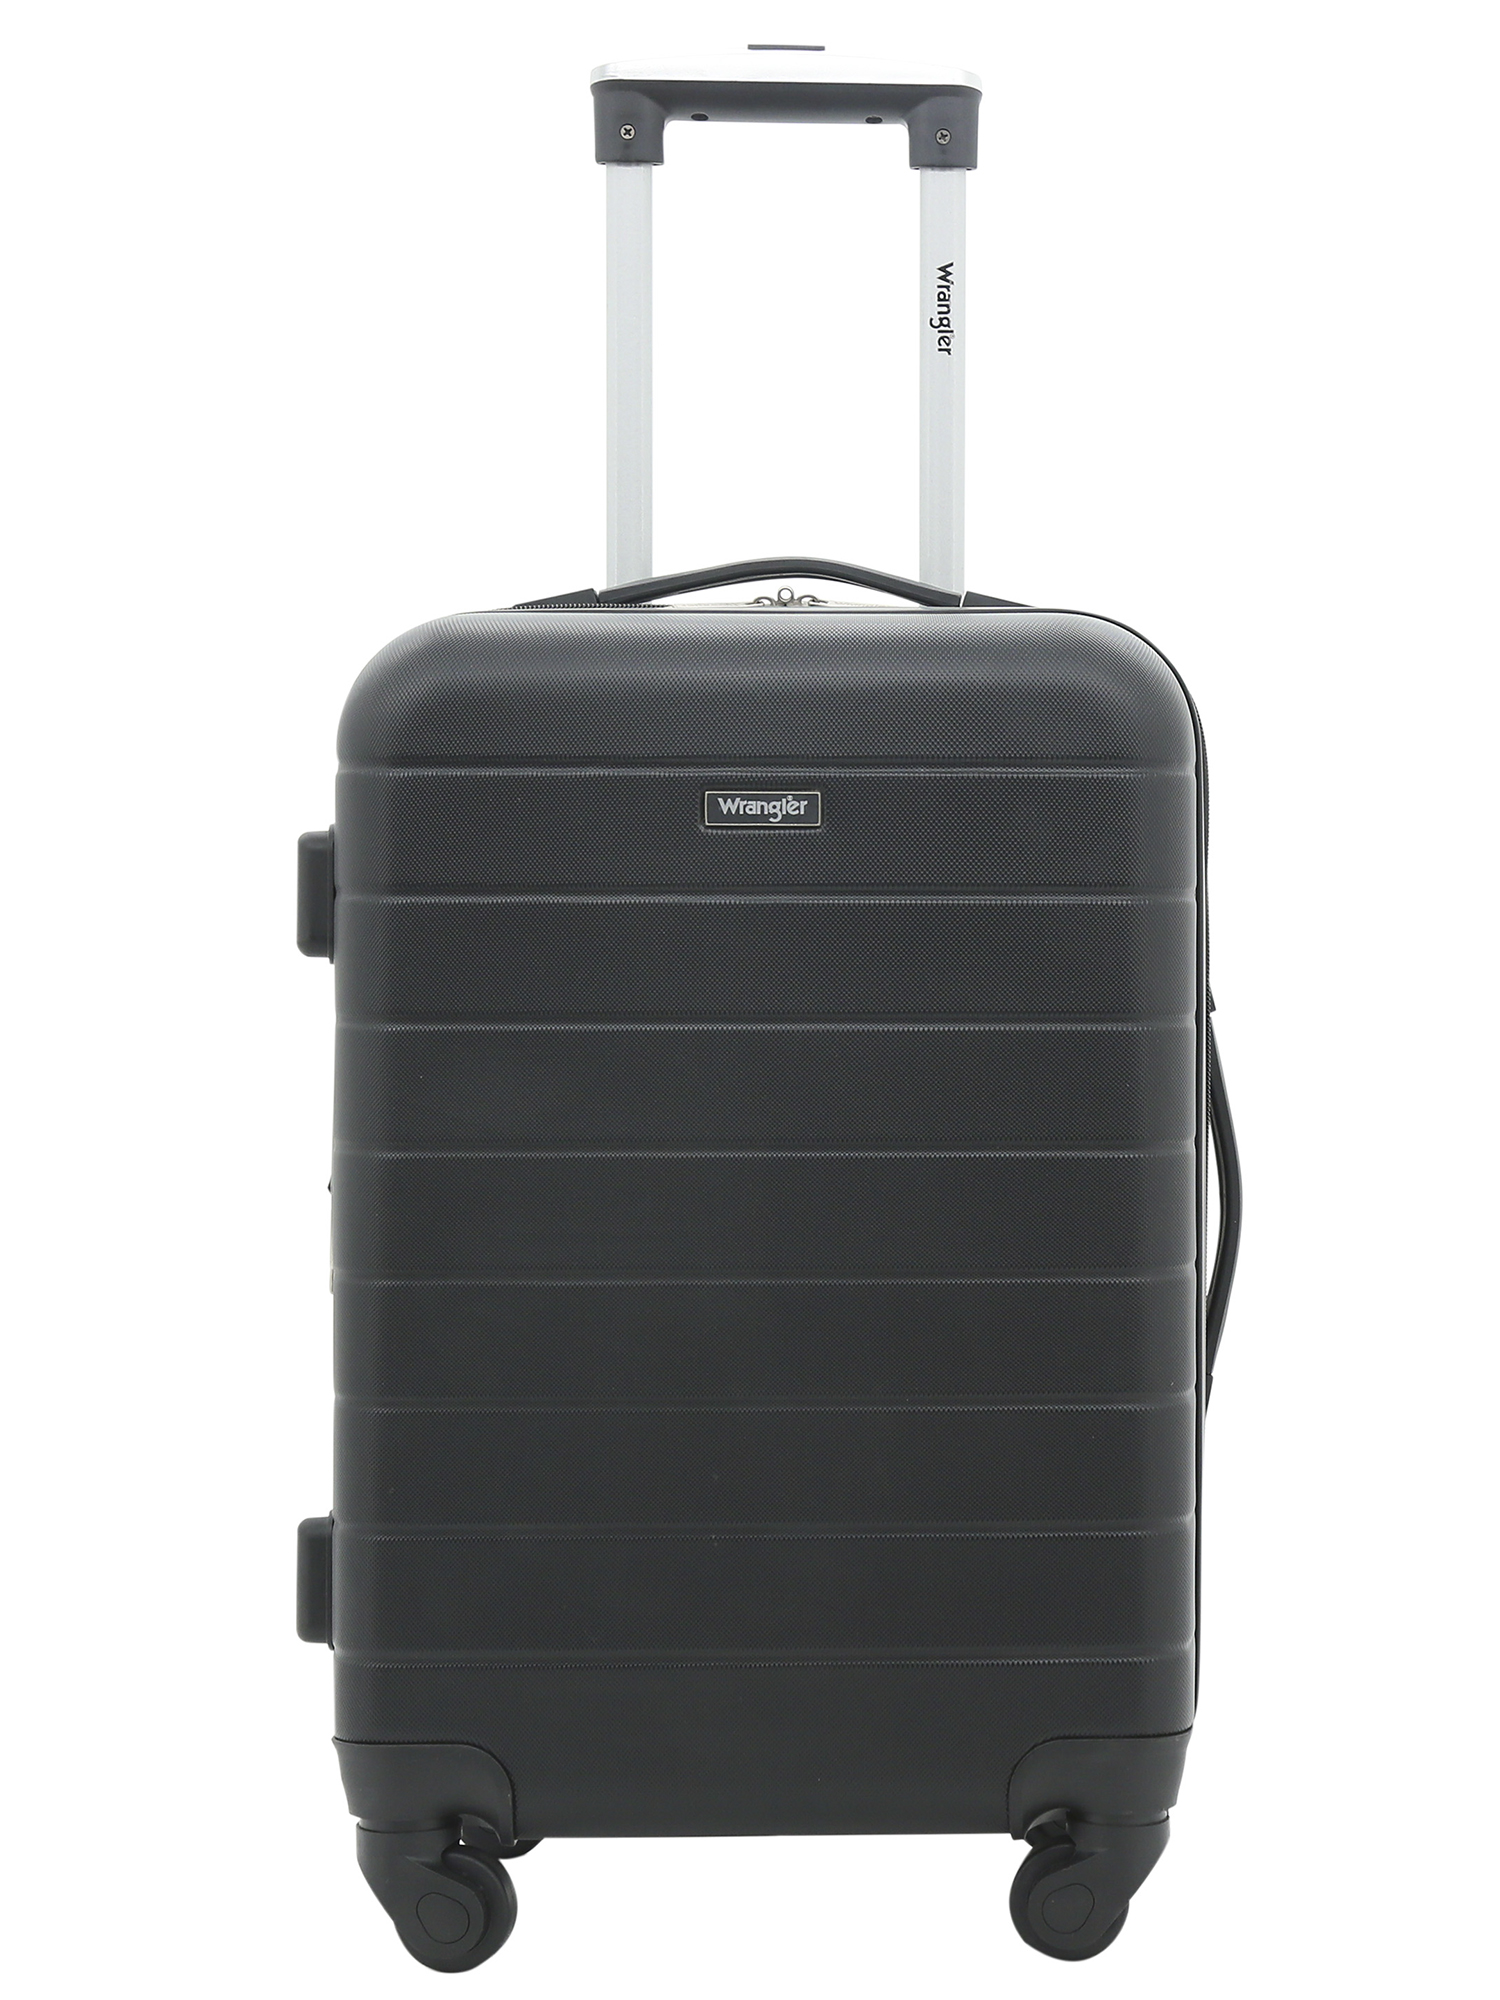 Wrangler 2pc Expandable Rolling Carry-on Set, Black - image 2 of 14